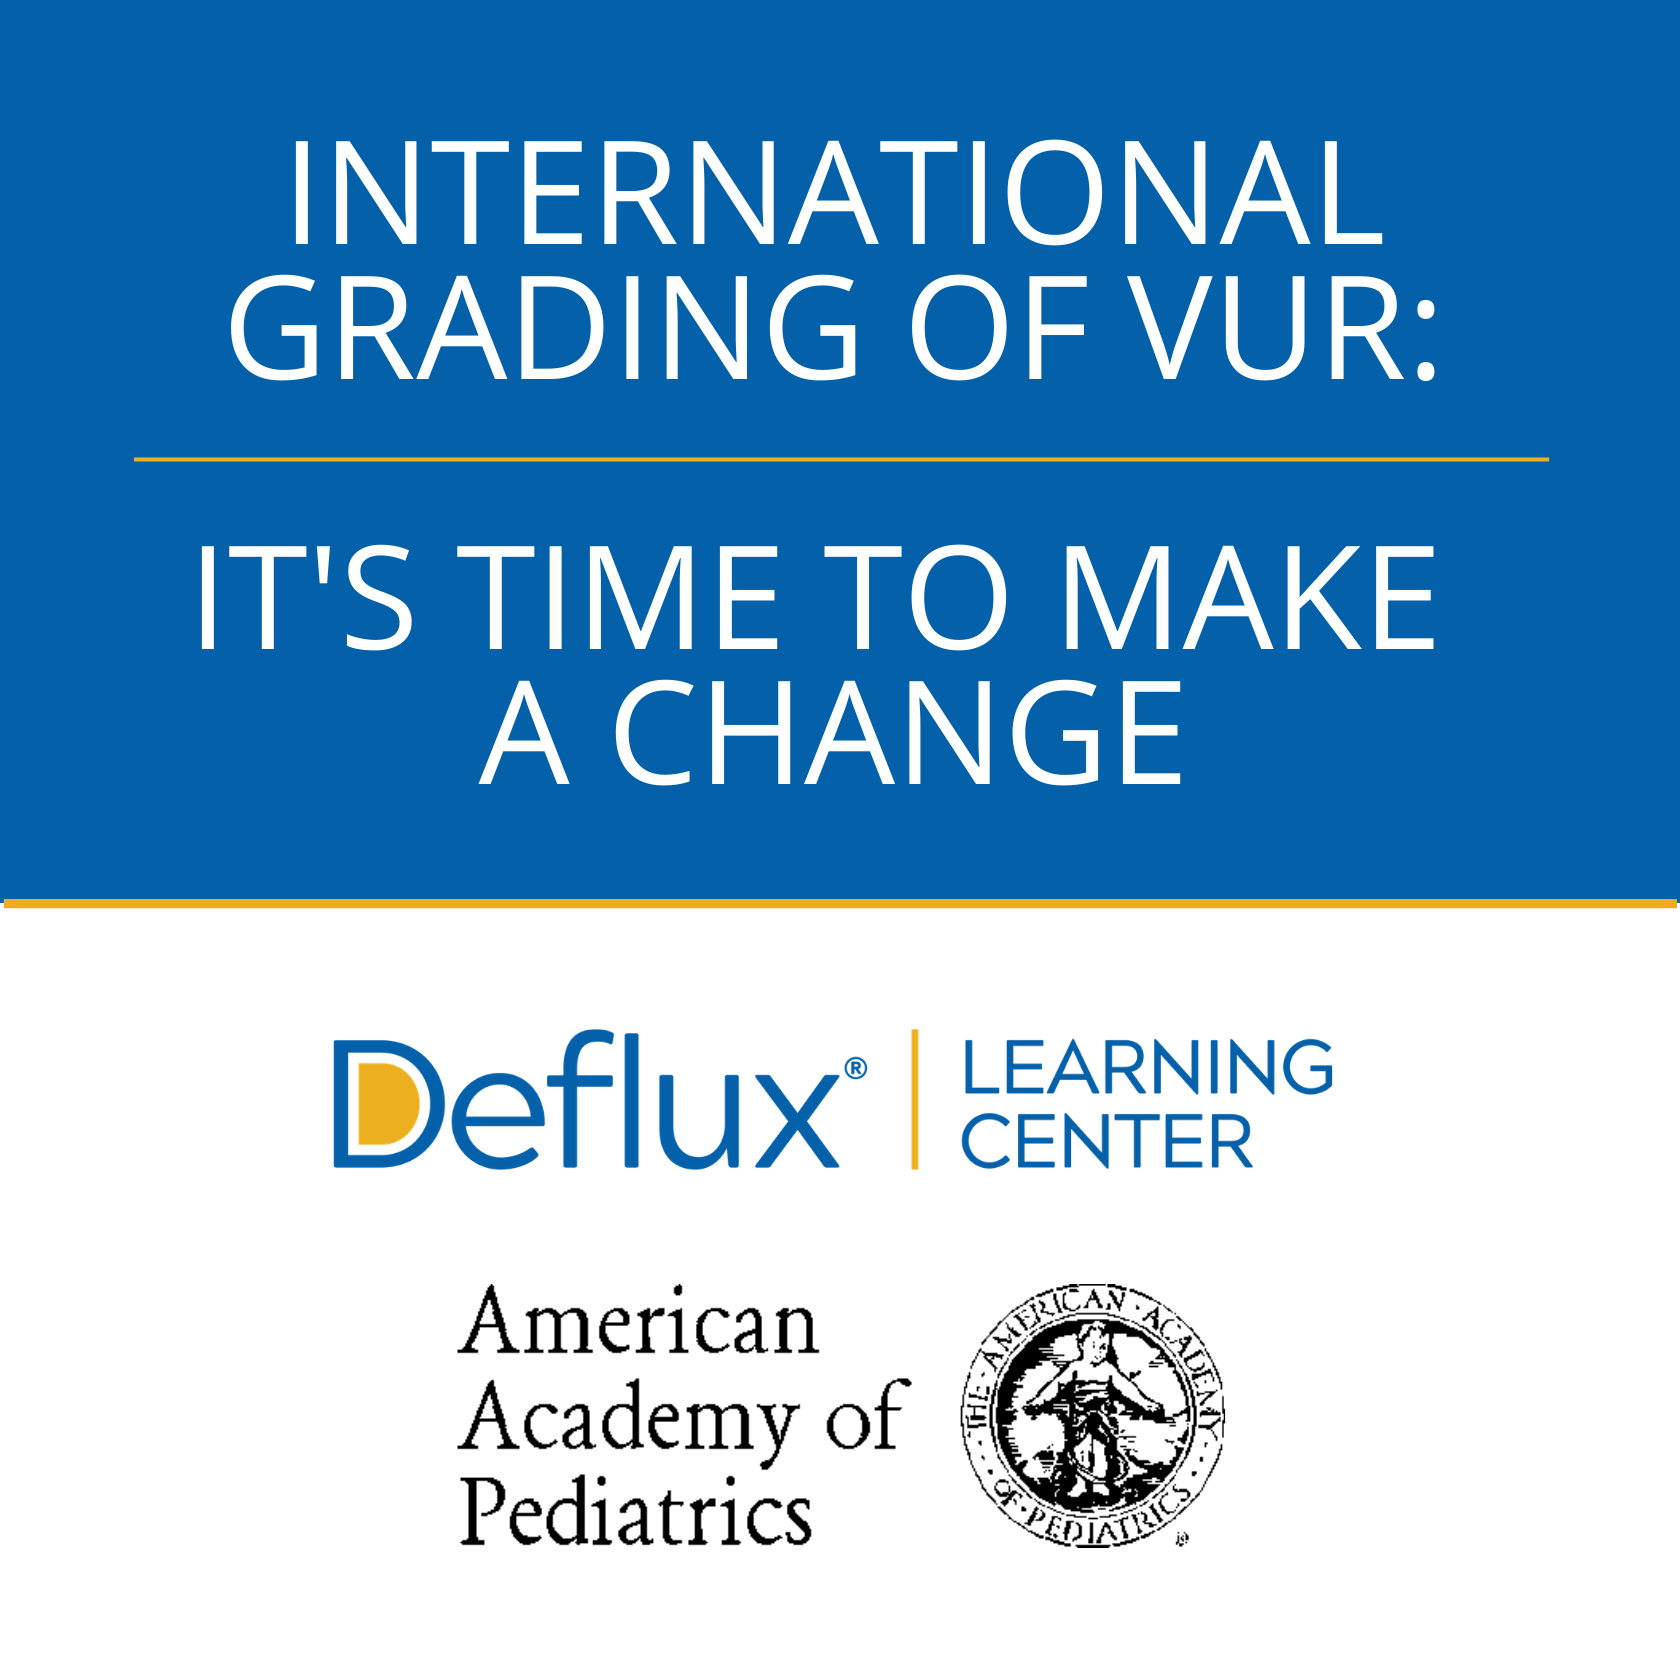 International Grading of VUR: It's Time to Make a Change